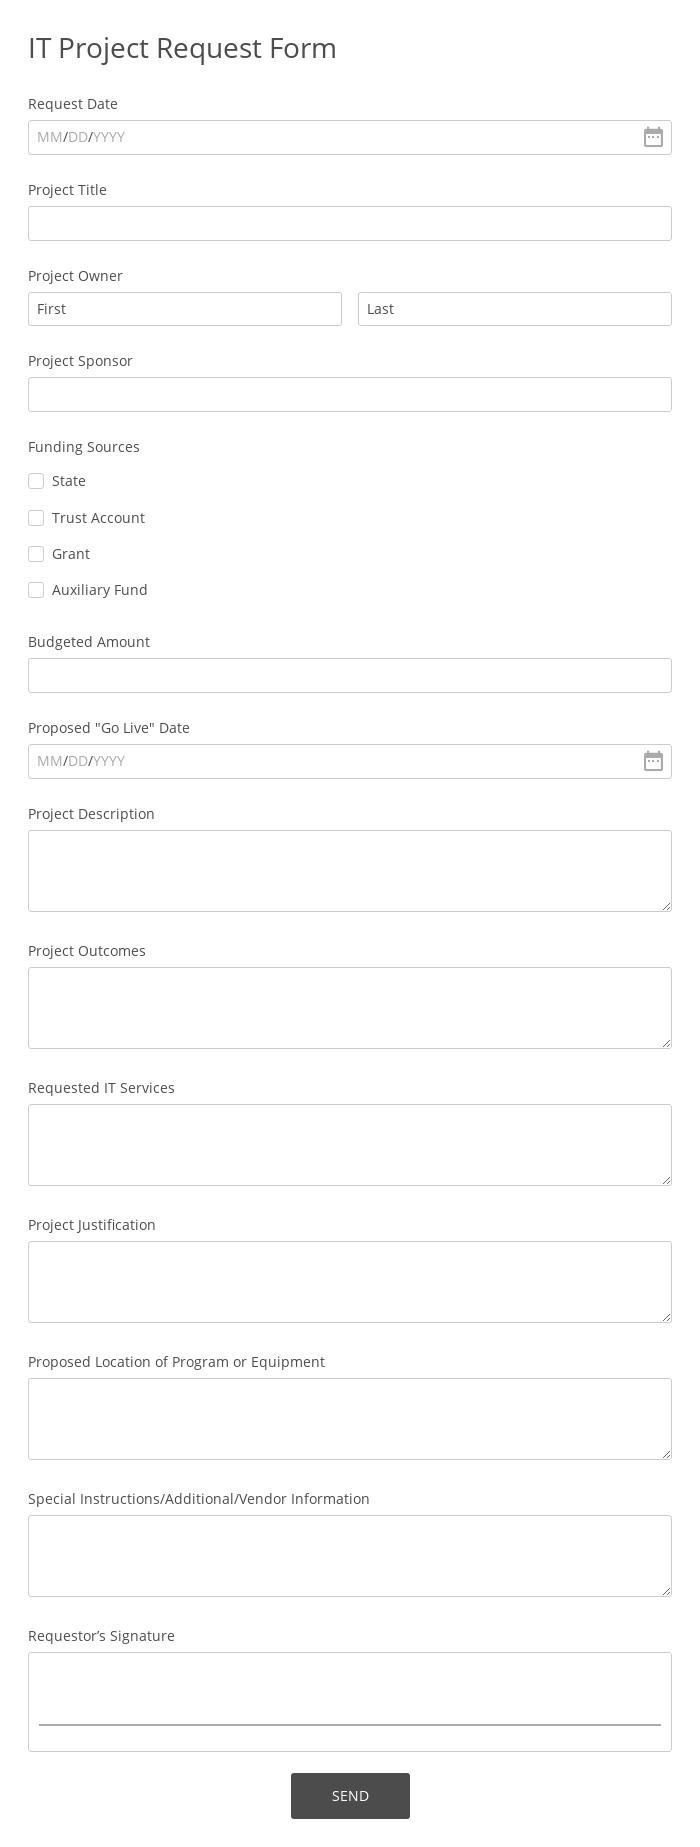 IT Project Request Form